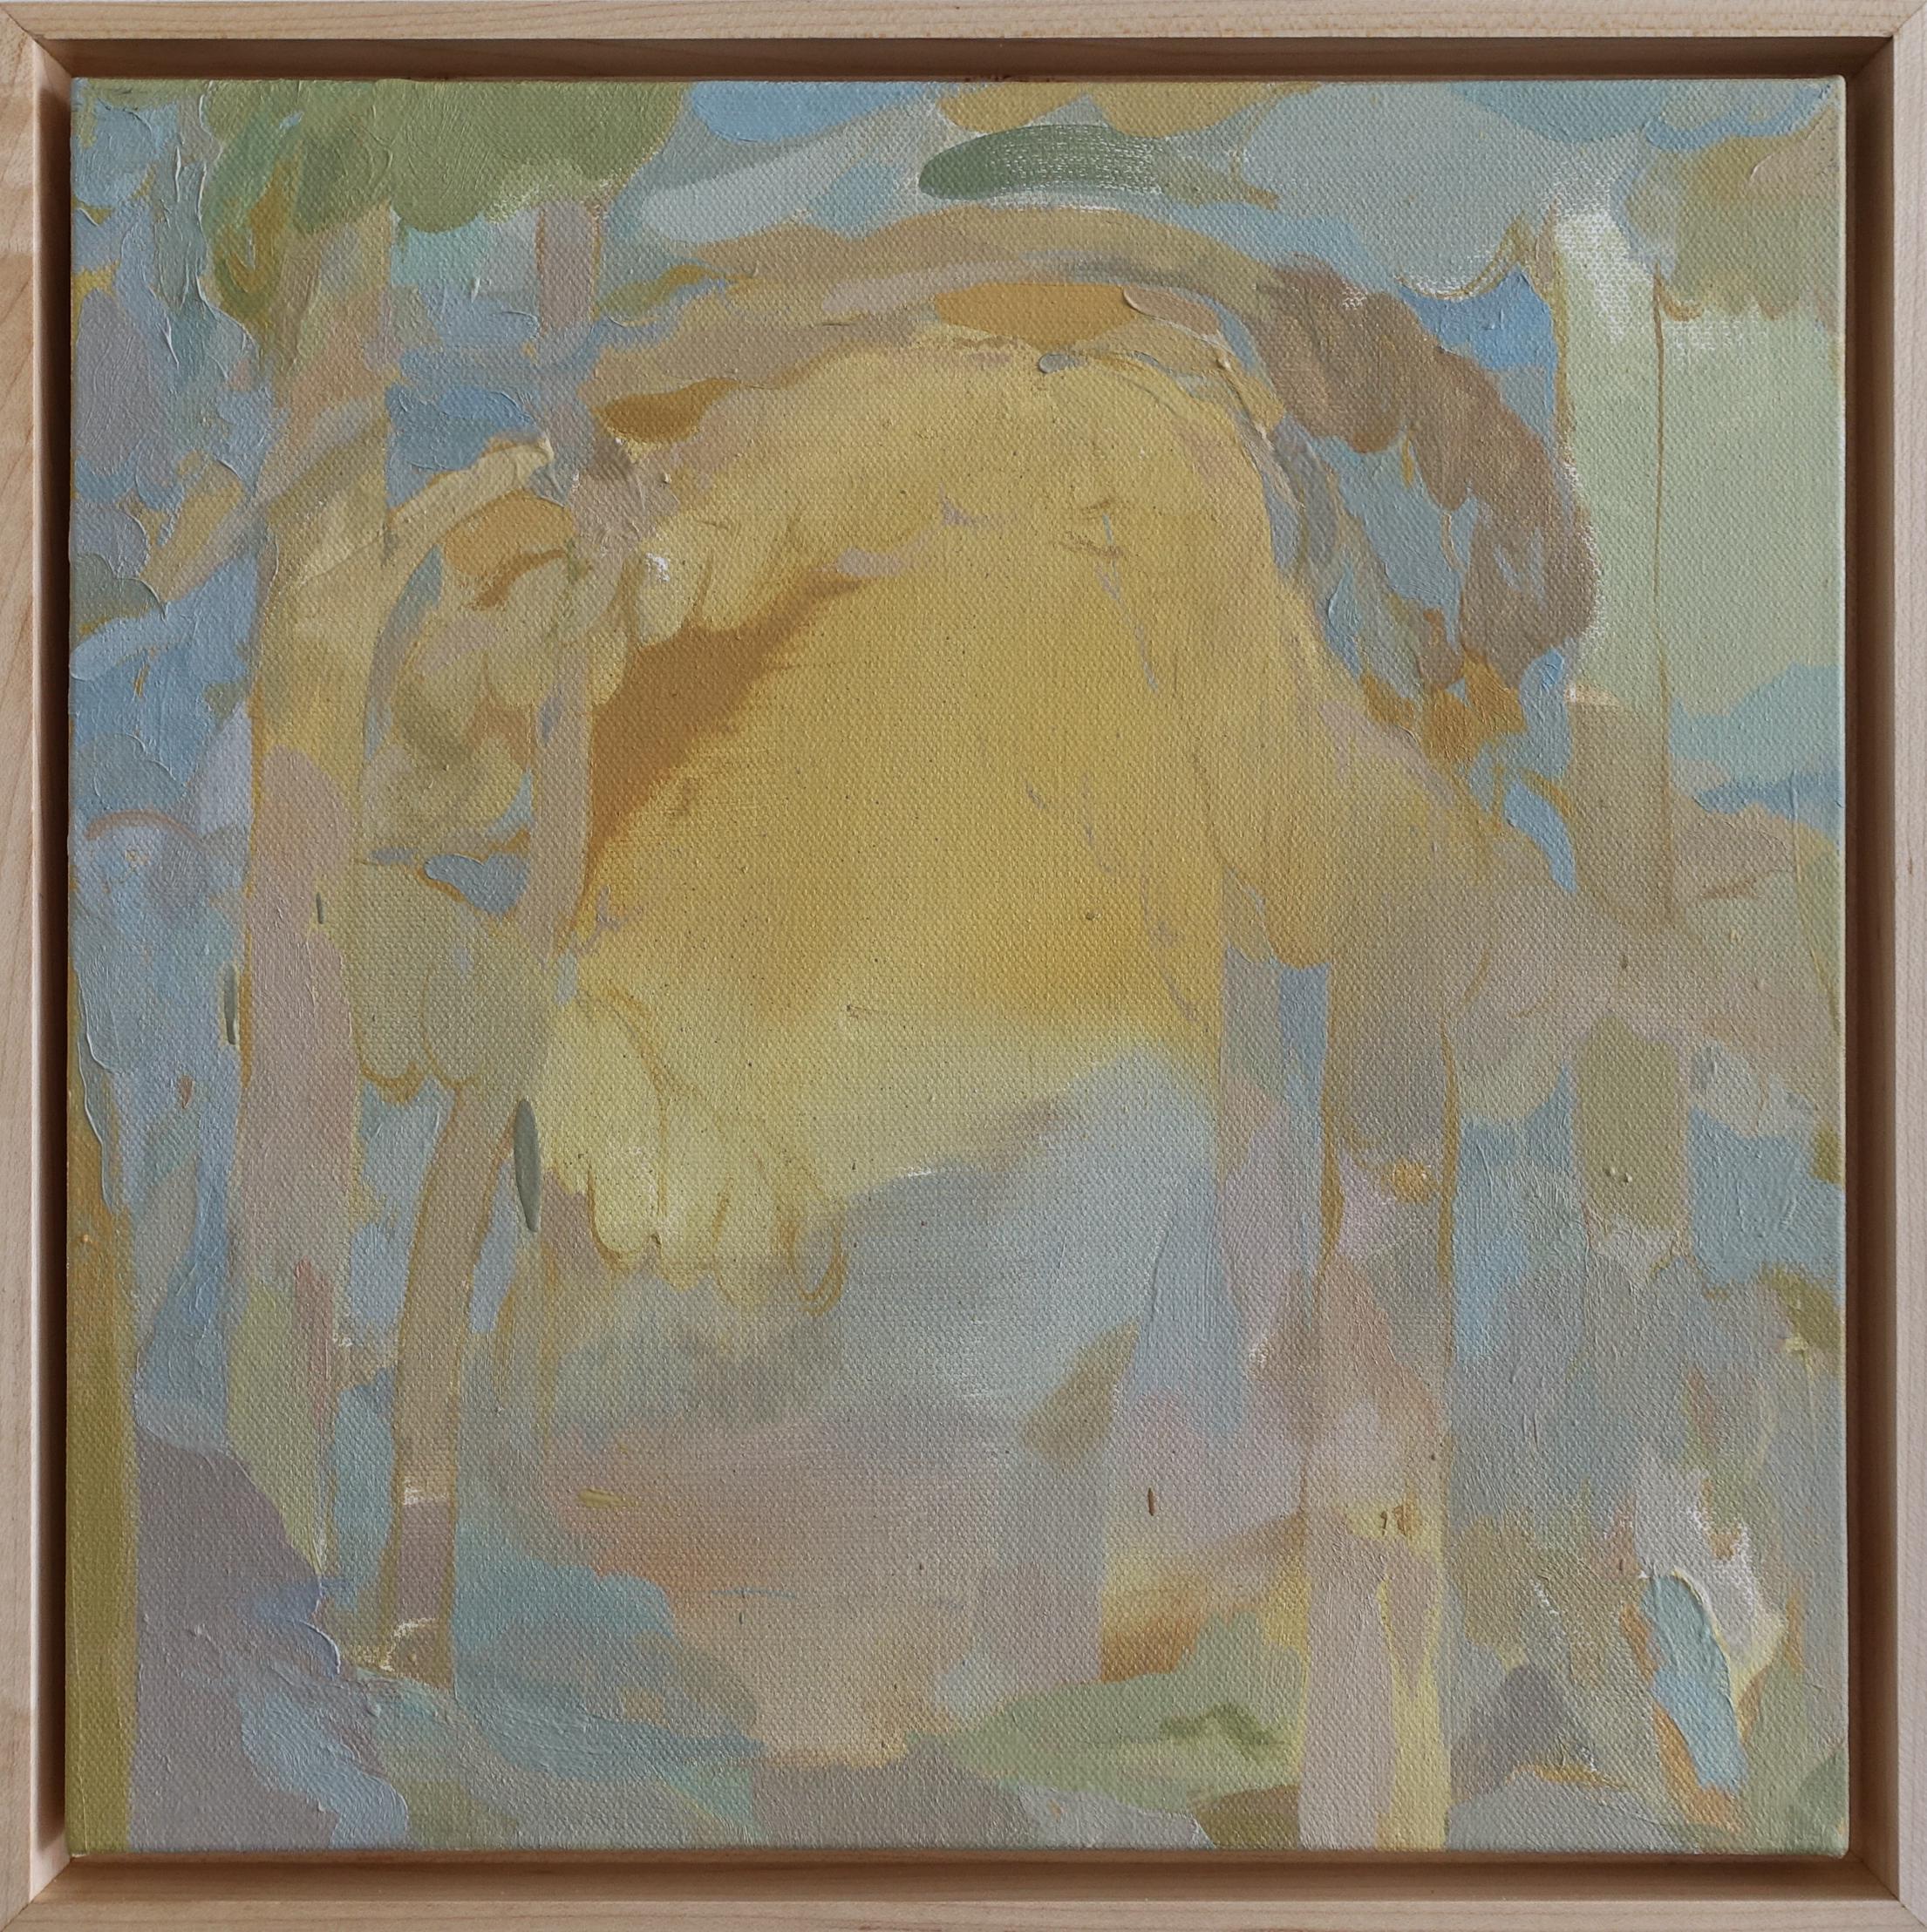 "Wrist" an abstract landscape painting, oil on canvas by Skylar Hughes. Using a palette of delicate pastels, Skylar's interest in painting as the representation of our relationship to and experience of nature shines in this small canvas. The